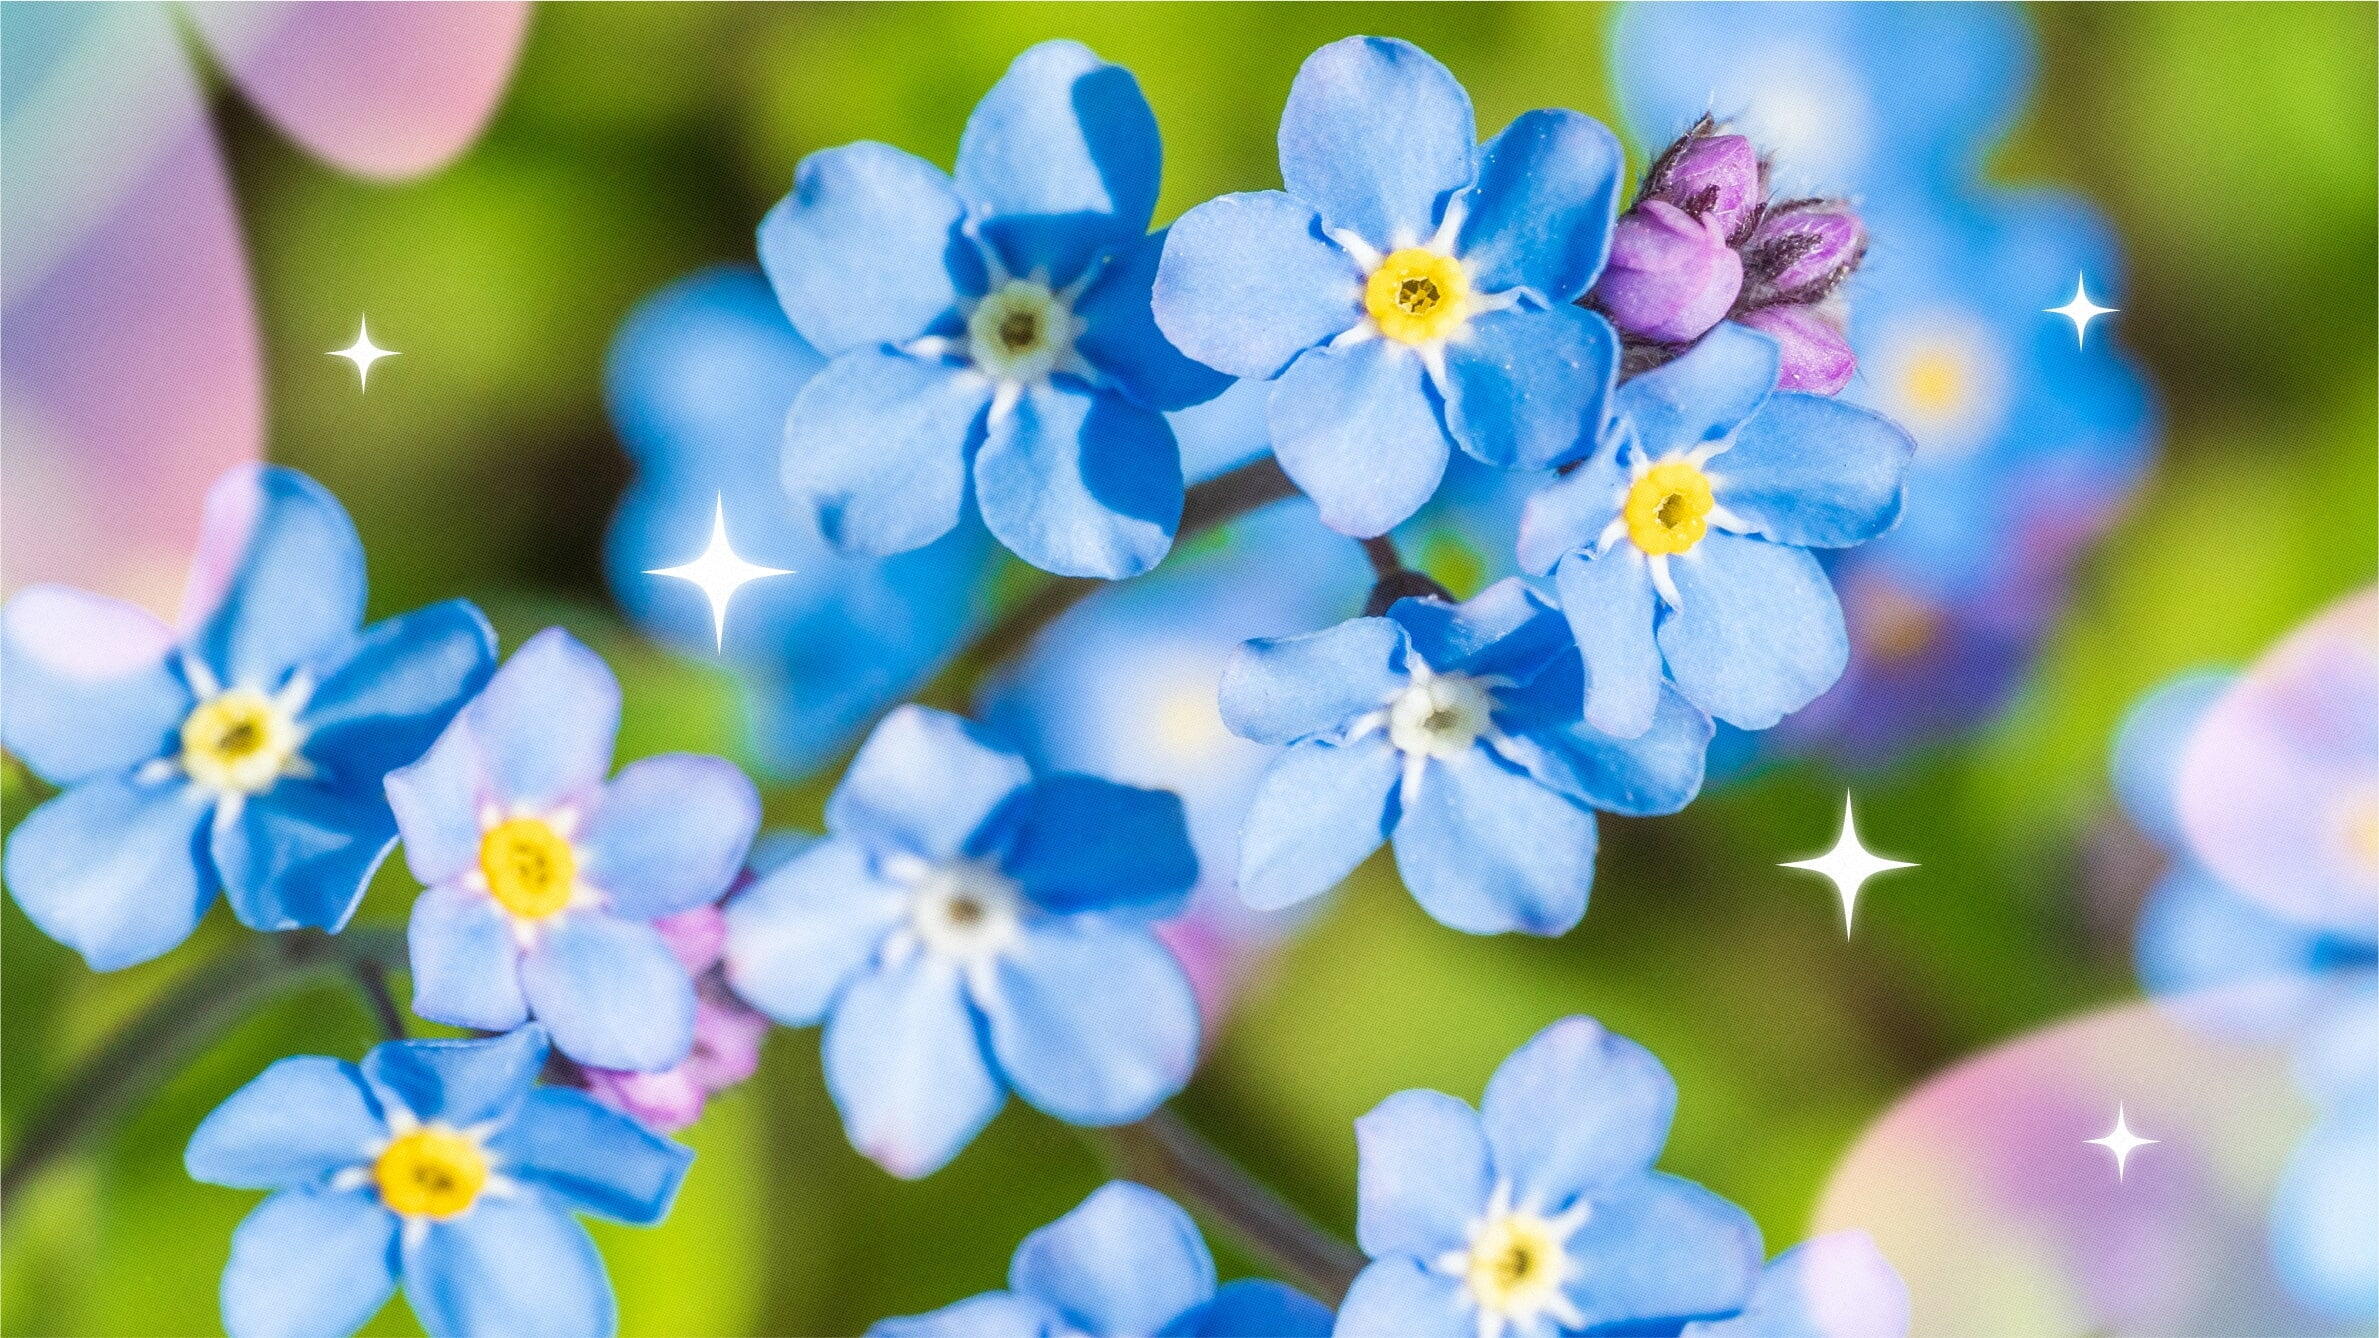 Blue forget-me-not flower